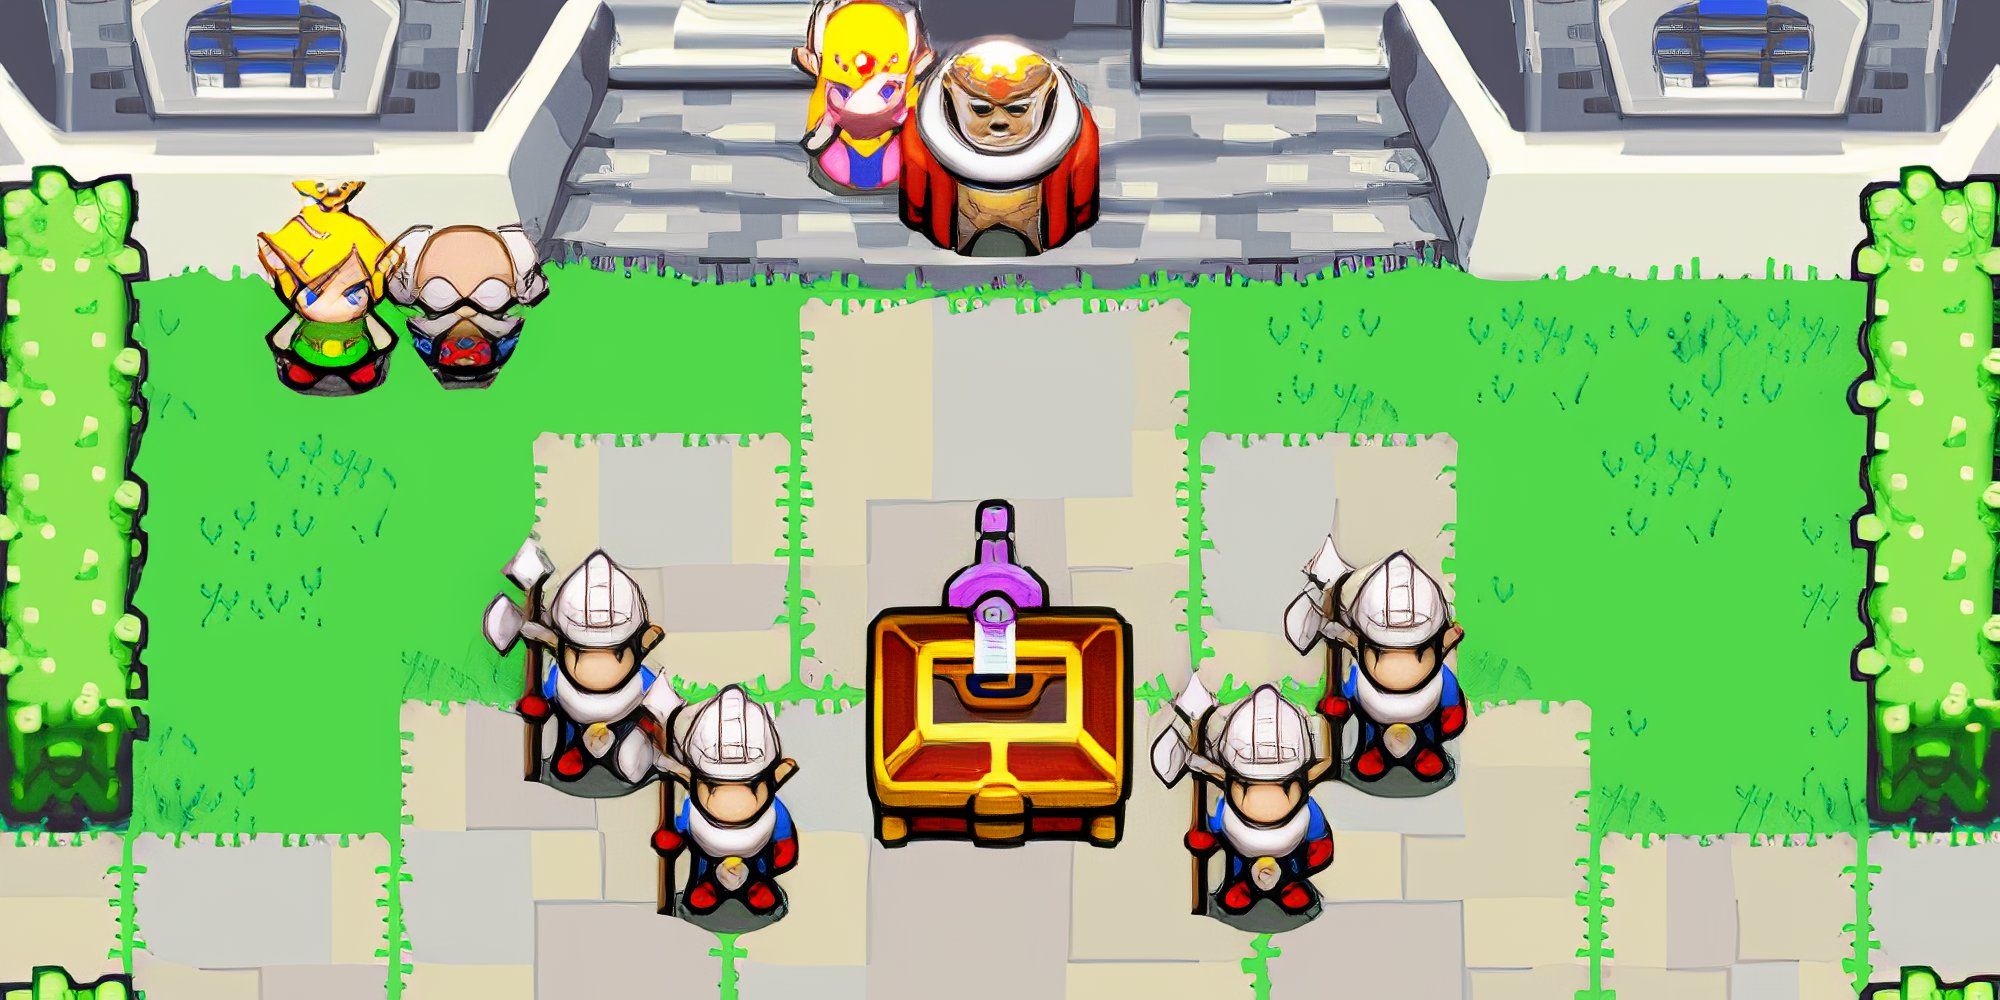 A scene featuring characters in The Legend of Zelda The Minish Cap